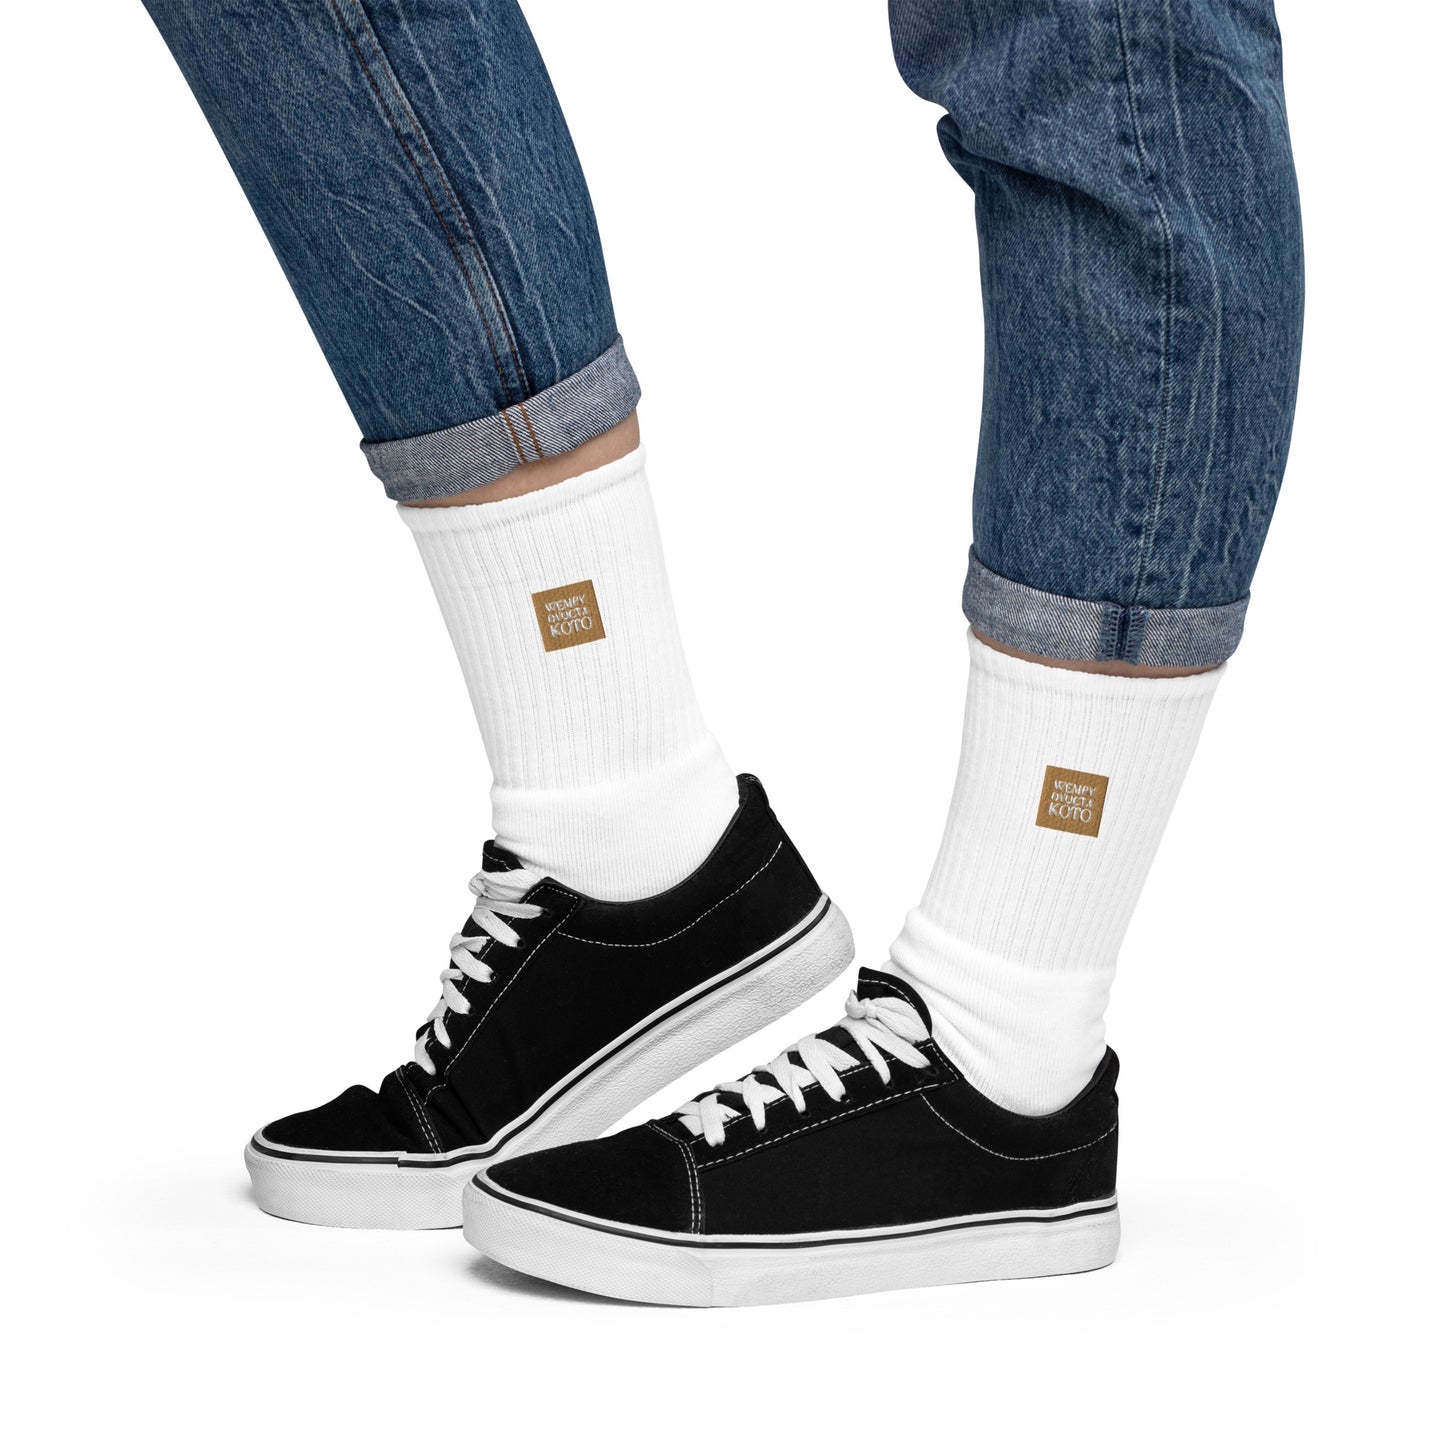 WDK Logo Embroidered - Sustainably Made Socks